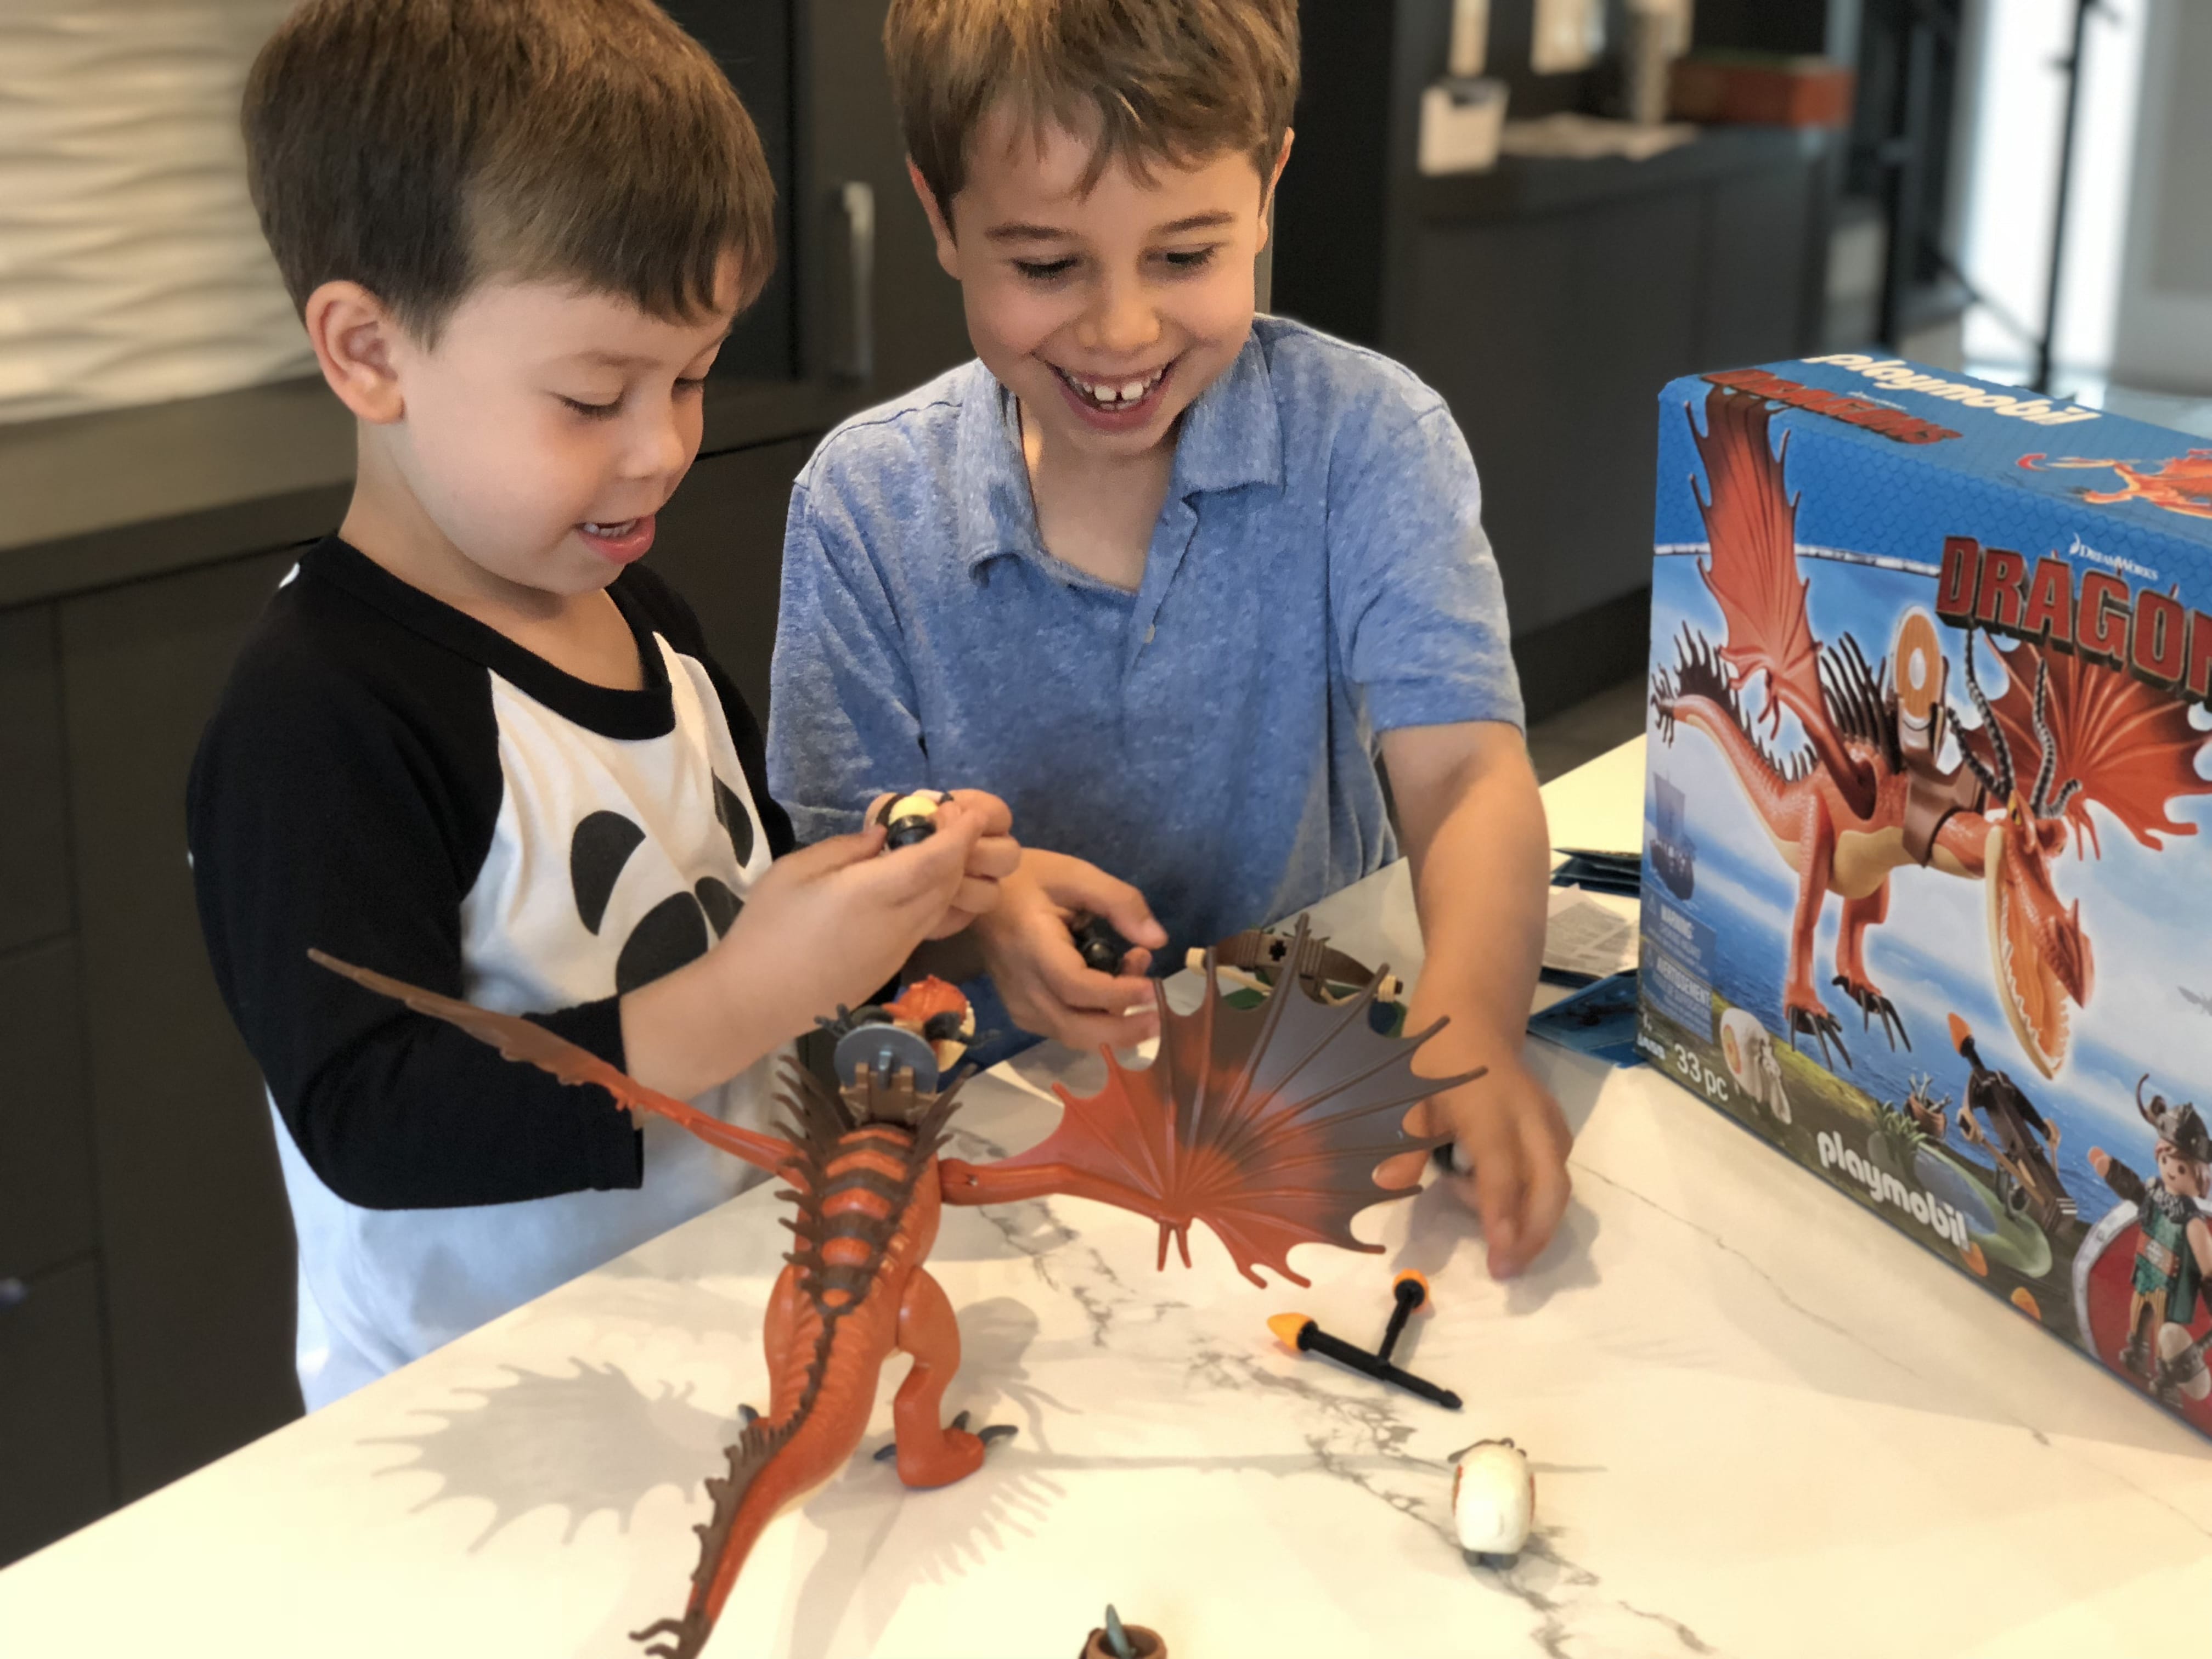 New PLAYMOBIL Dreamworks Dragons Playsets {Review}